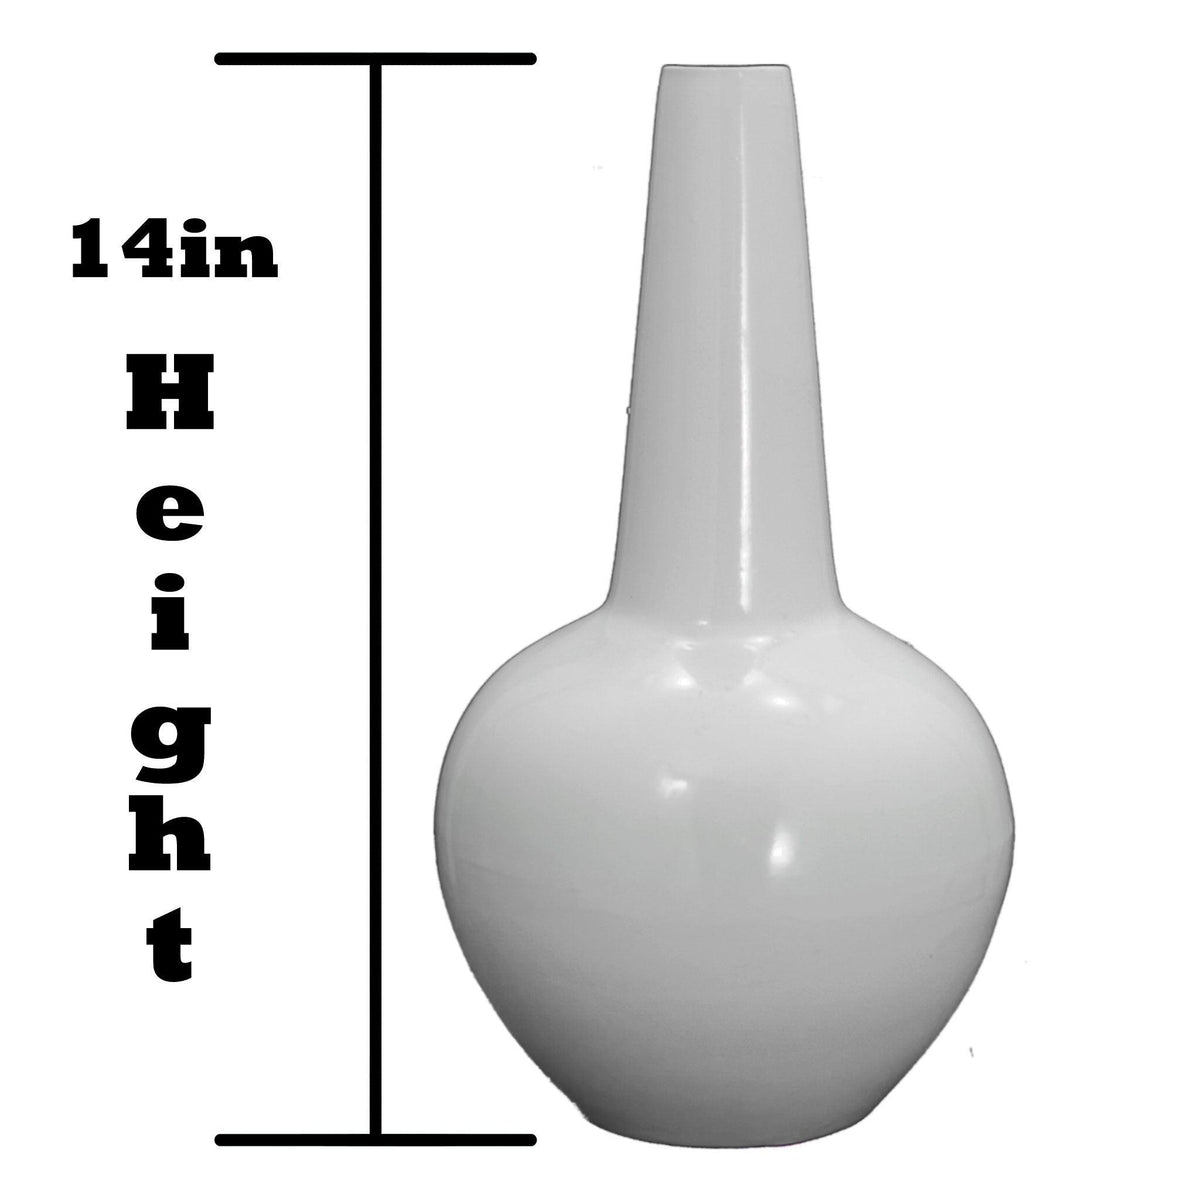 Lee Display's brand new 14in Amphora Greek Ceramic Vase comes in a high gloss white finish on sale at leedisplay.com